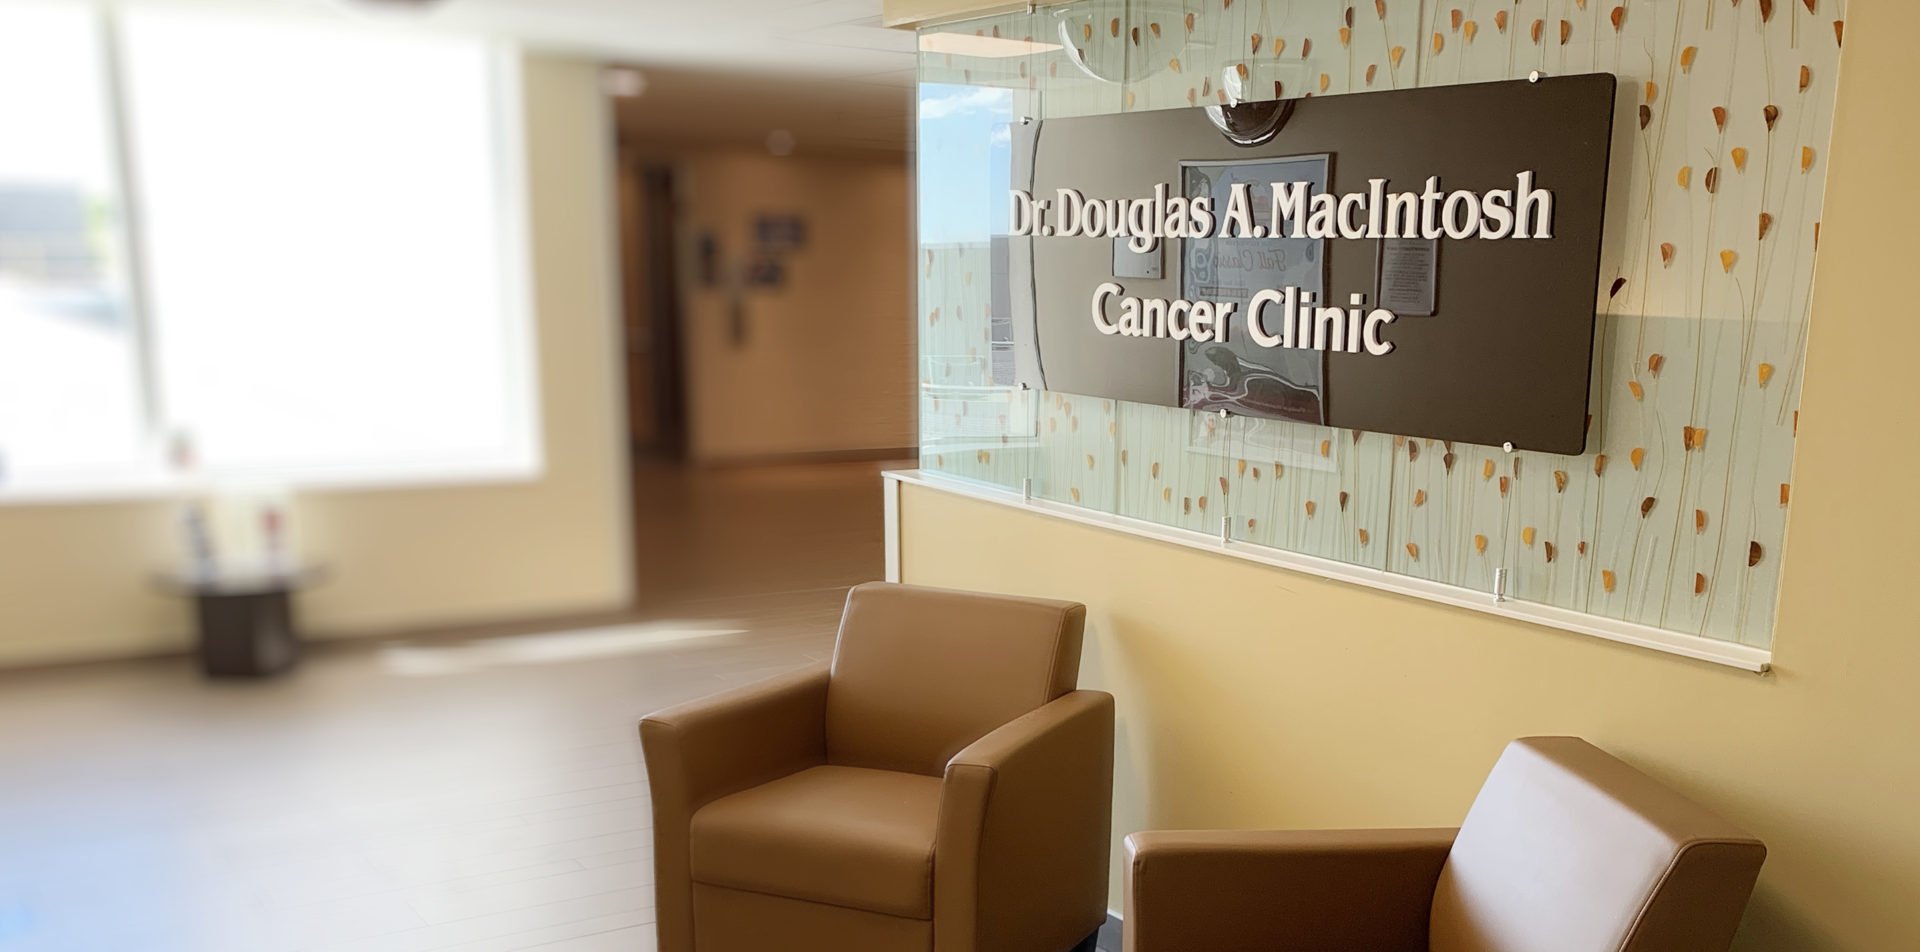 The Chemotherapy Room